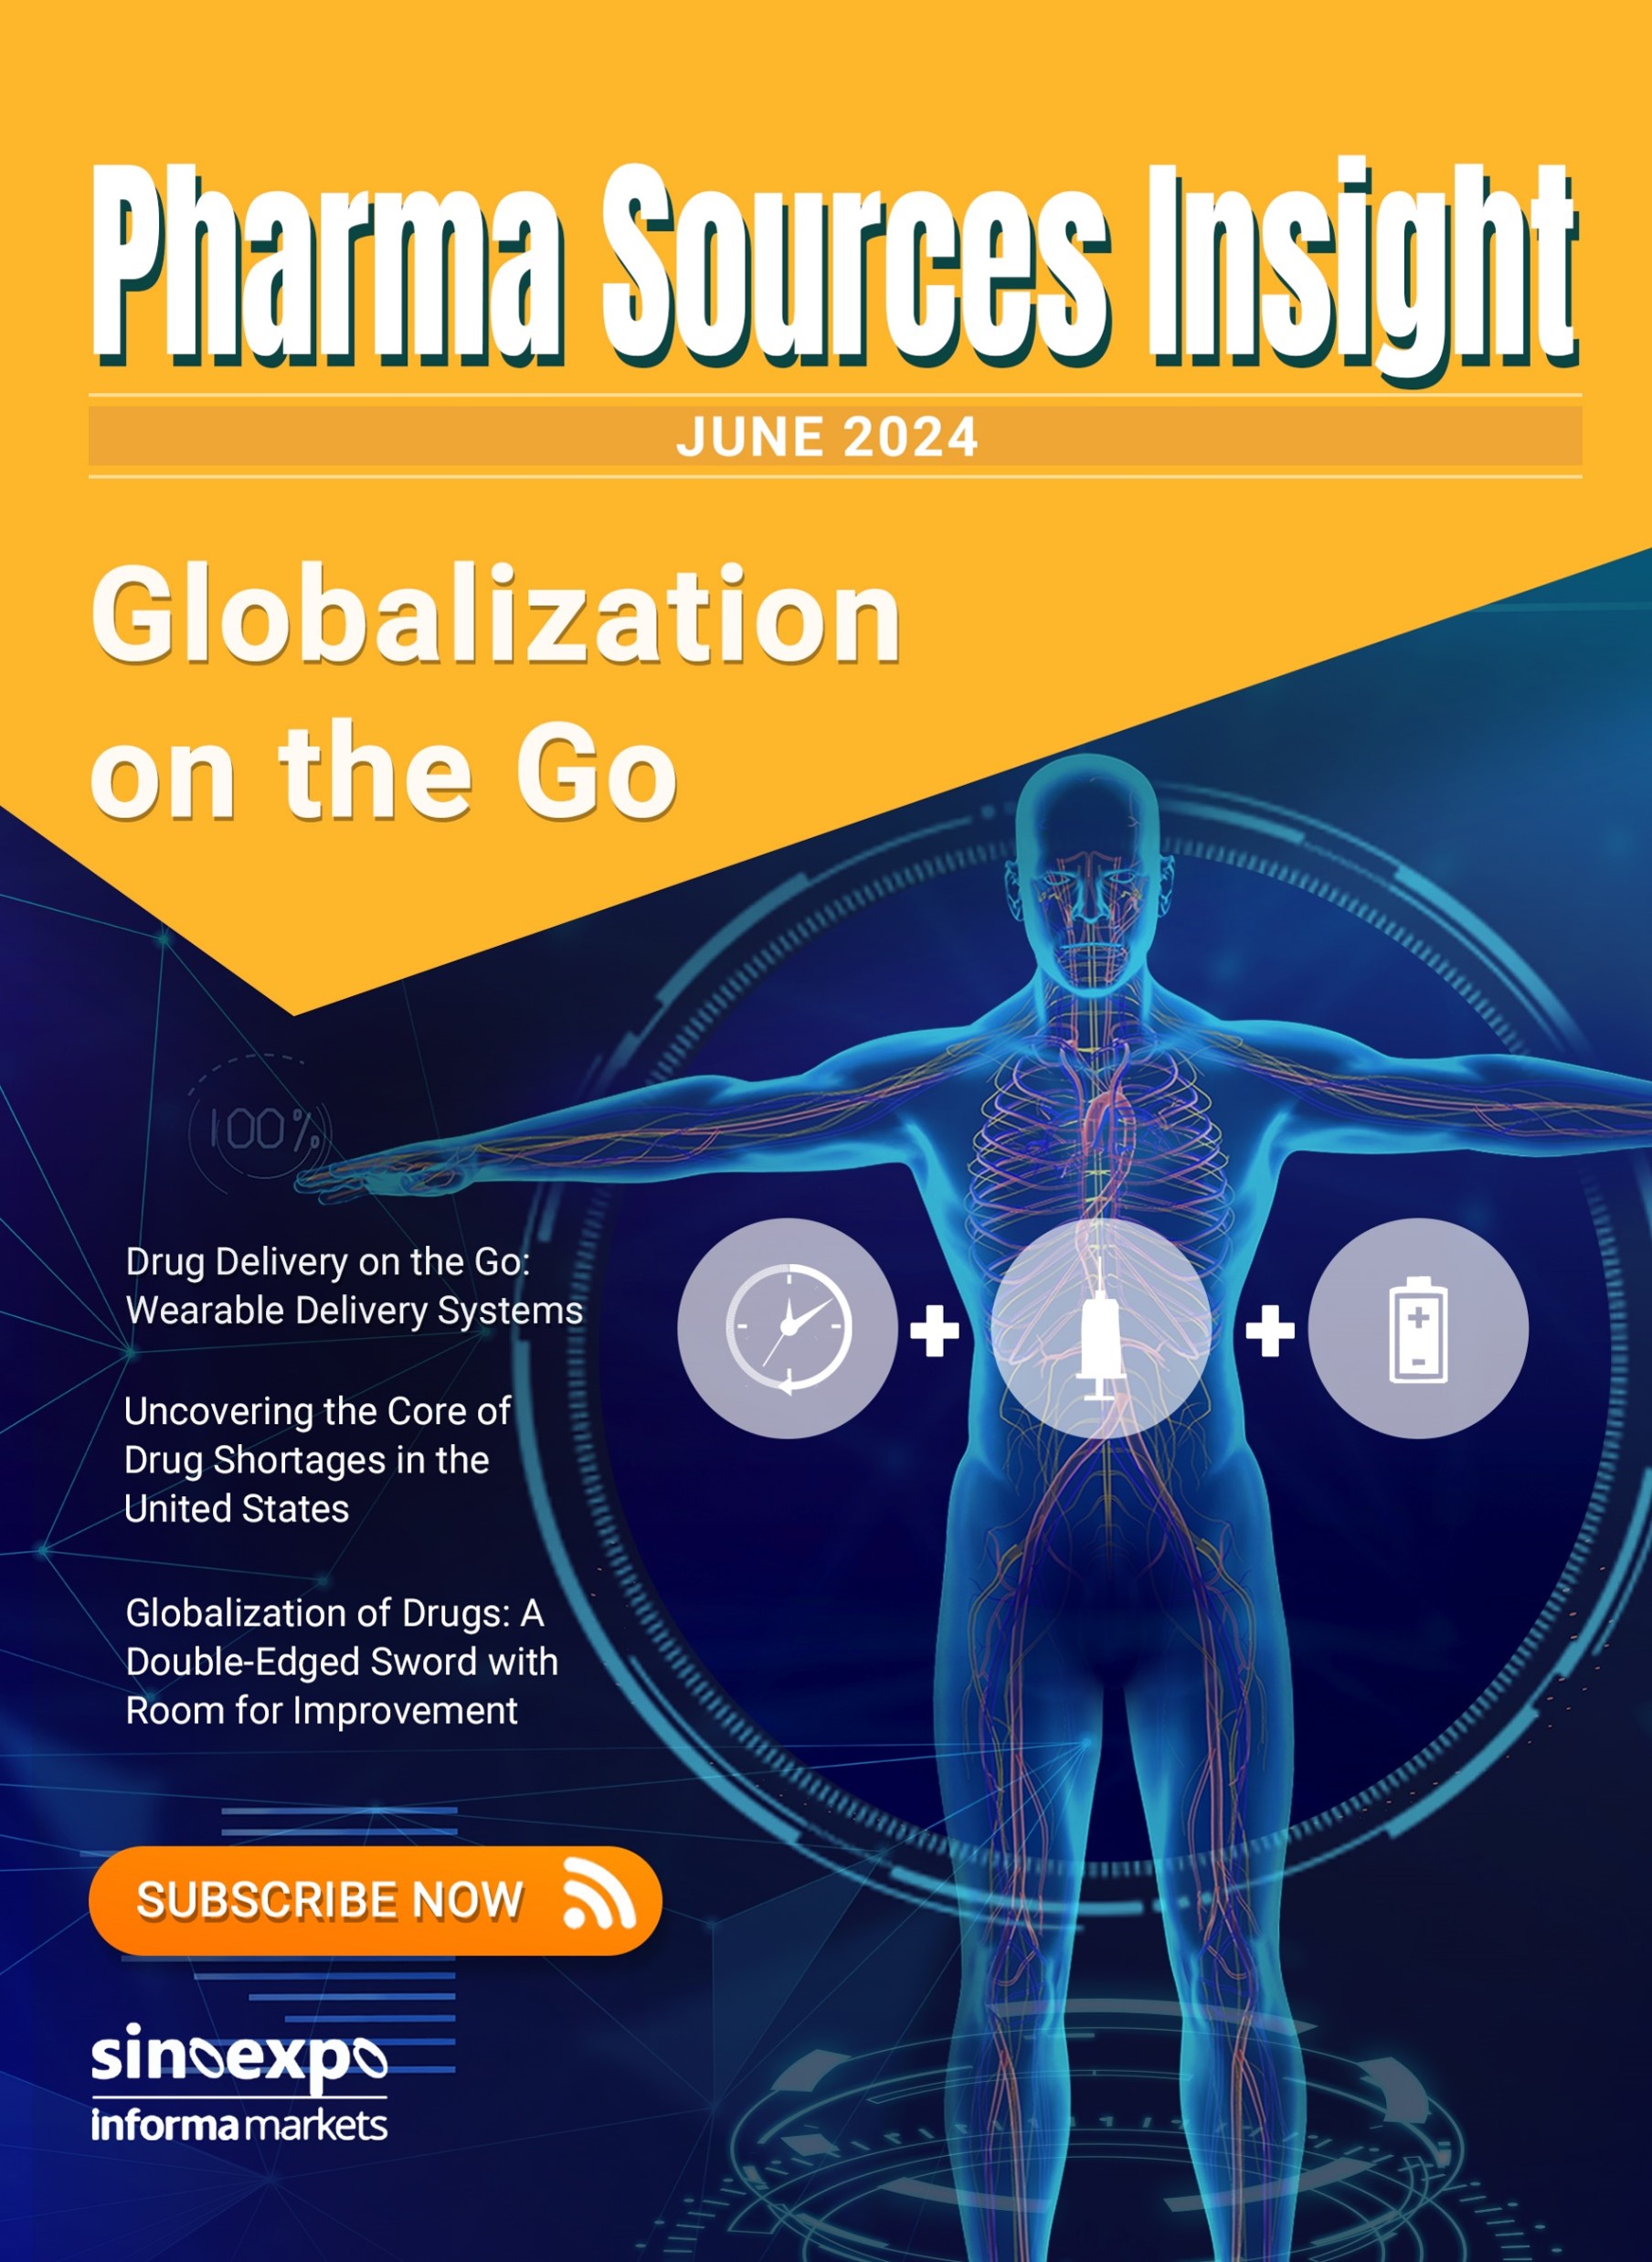 Pharma Sources Insight June 2024: Globalization on the Go